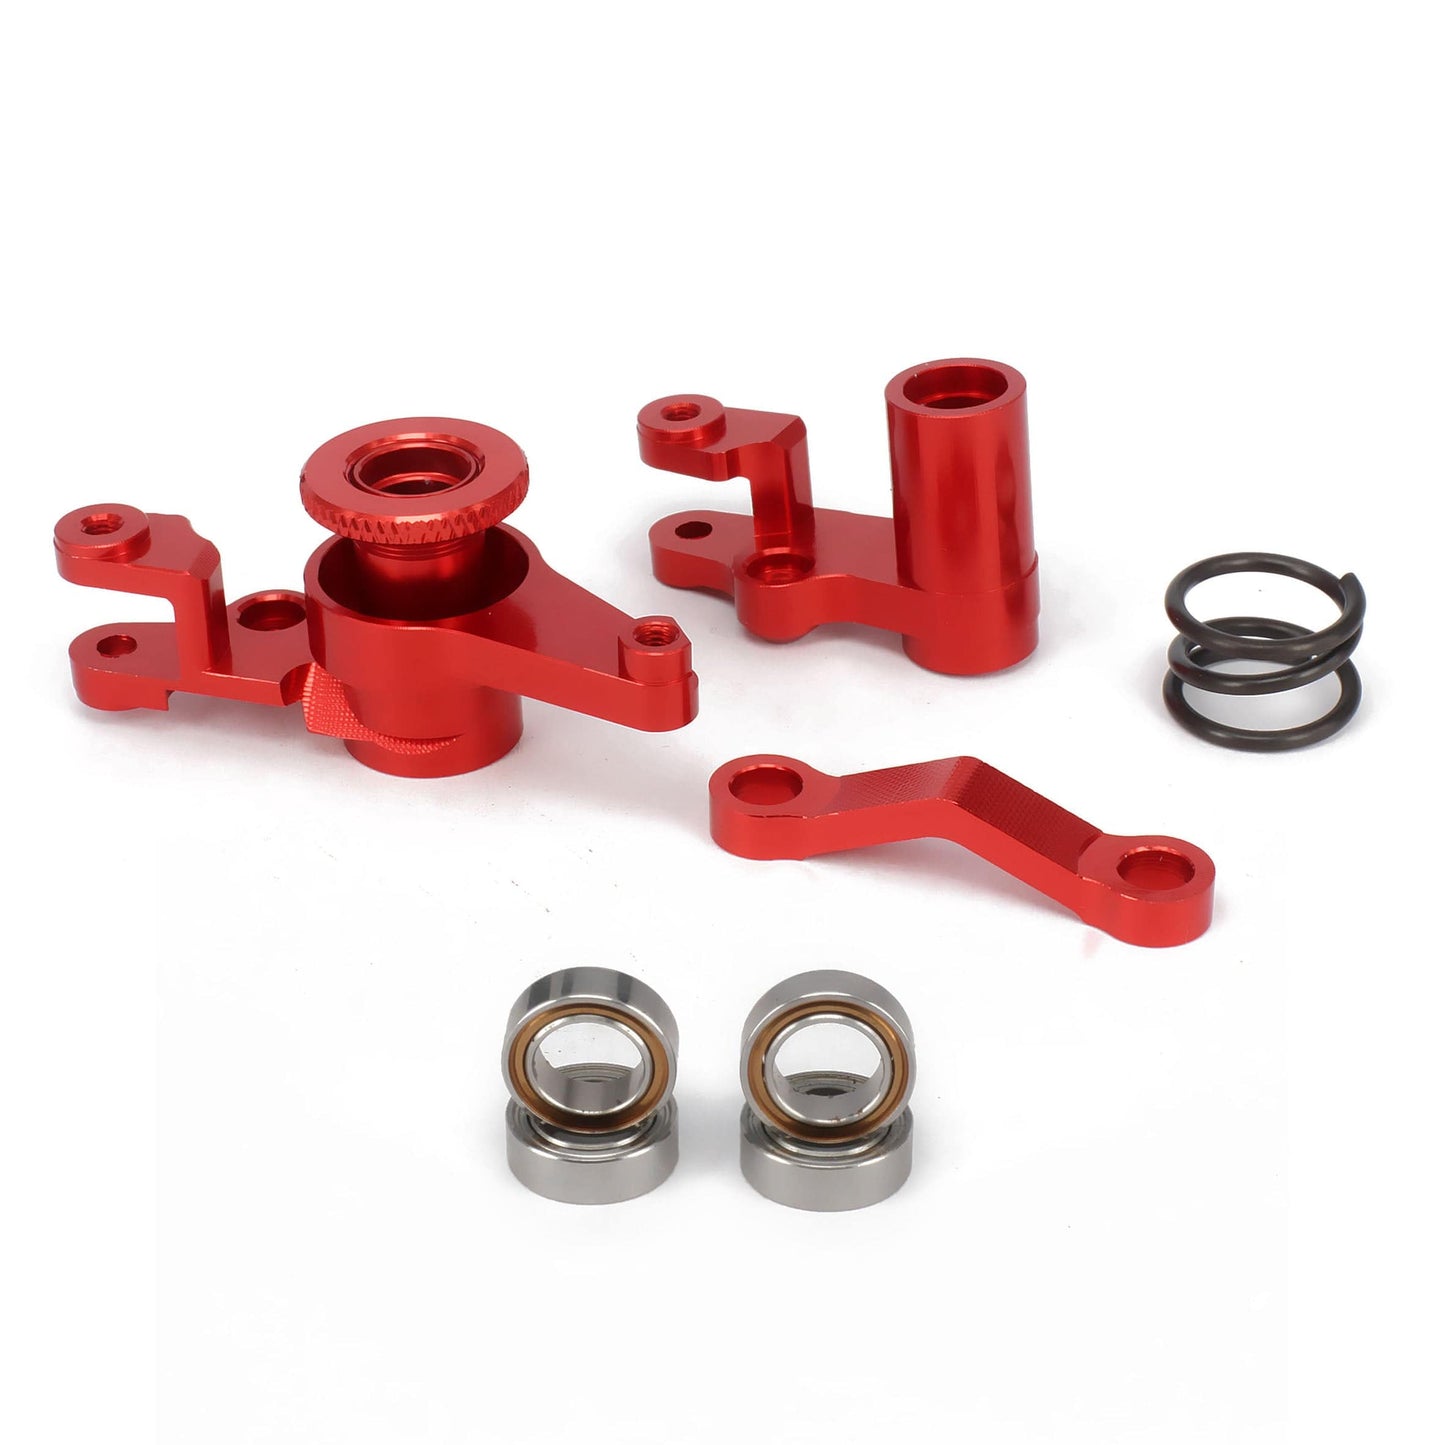 RCAWD TRAXXAS UDR RCAWD Aluminum Steering Bellcranks and Servo Saver Set for Traxxas 1/10 Slash 4x4